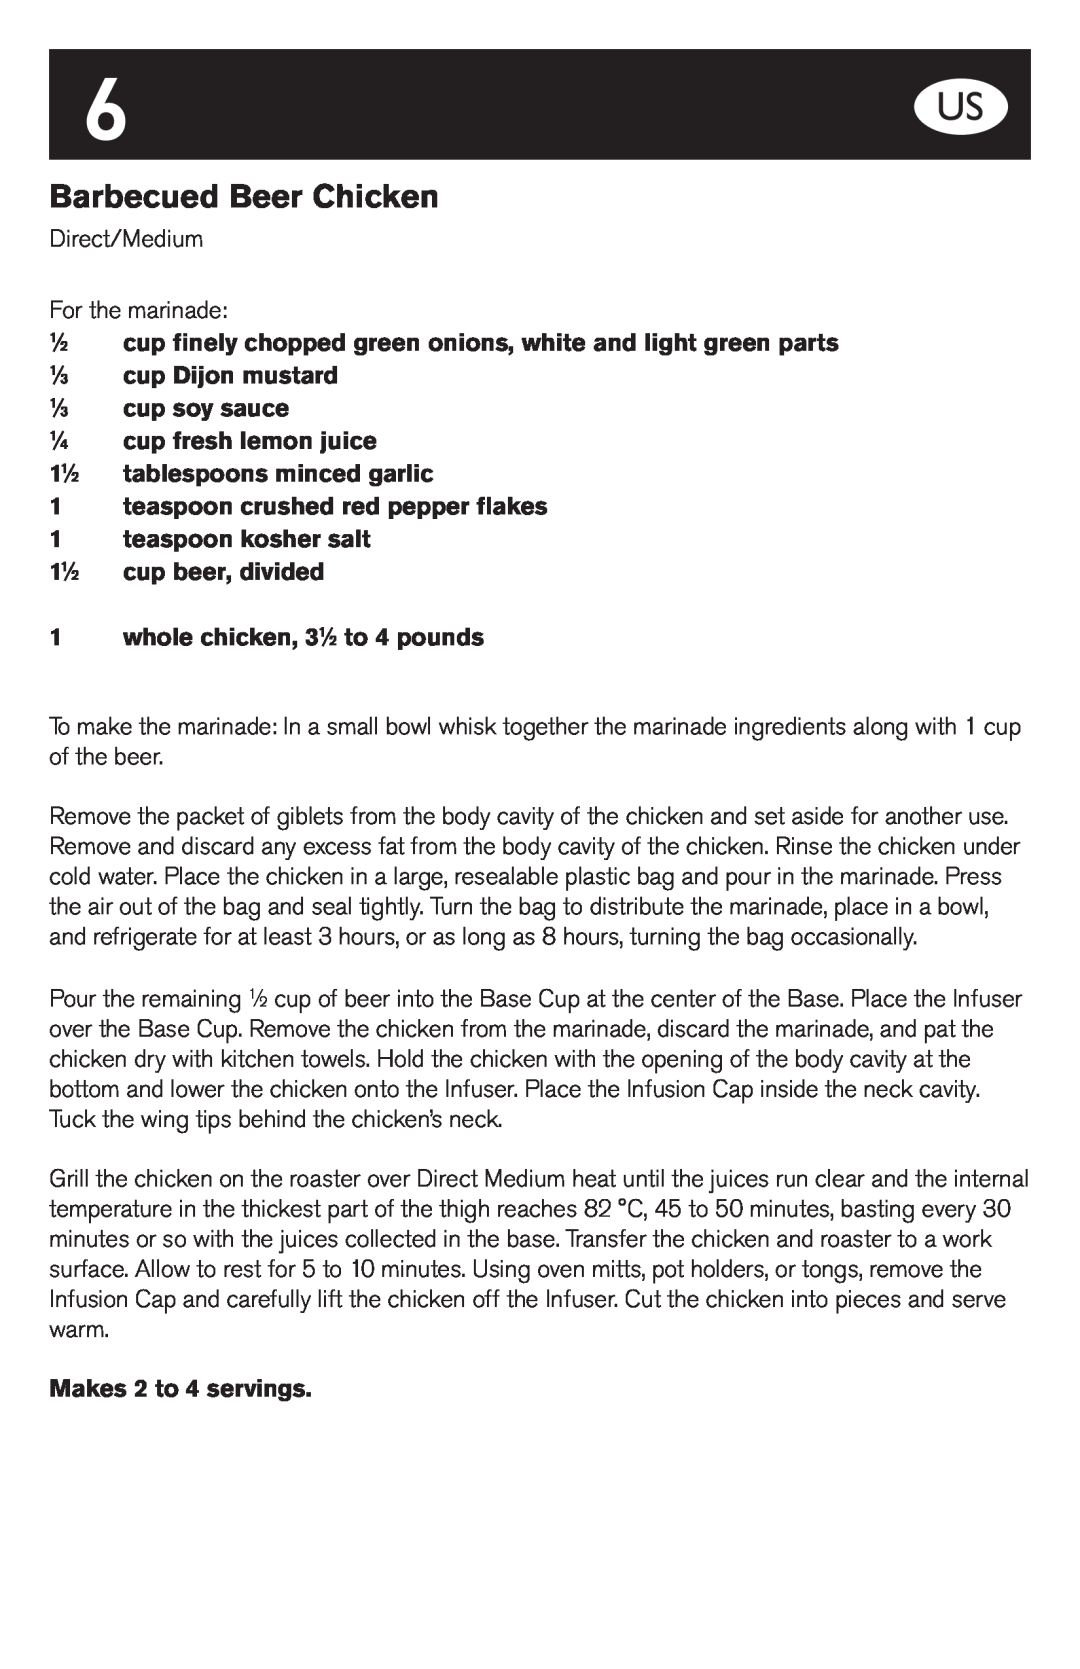 Weber Oven manual Barbecued Beer Chicken, 1⁄3 cup soy sauce 1⁄4 cup fresh lemon juice, 11⁄2 tablespoons minced garlic 